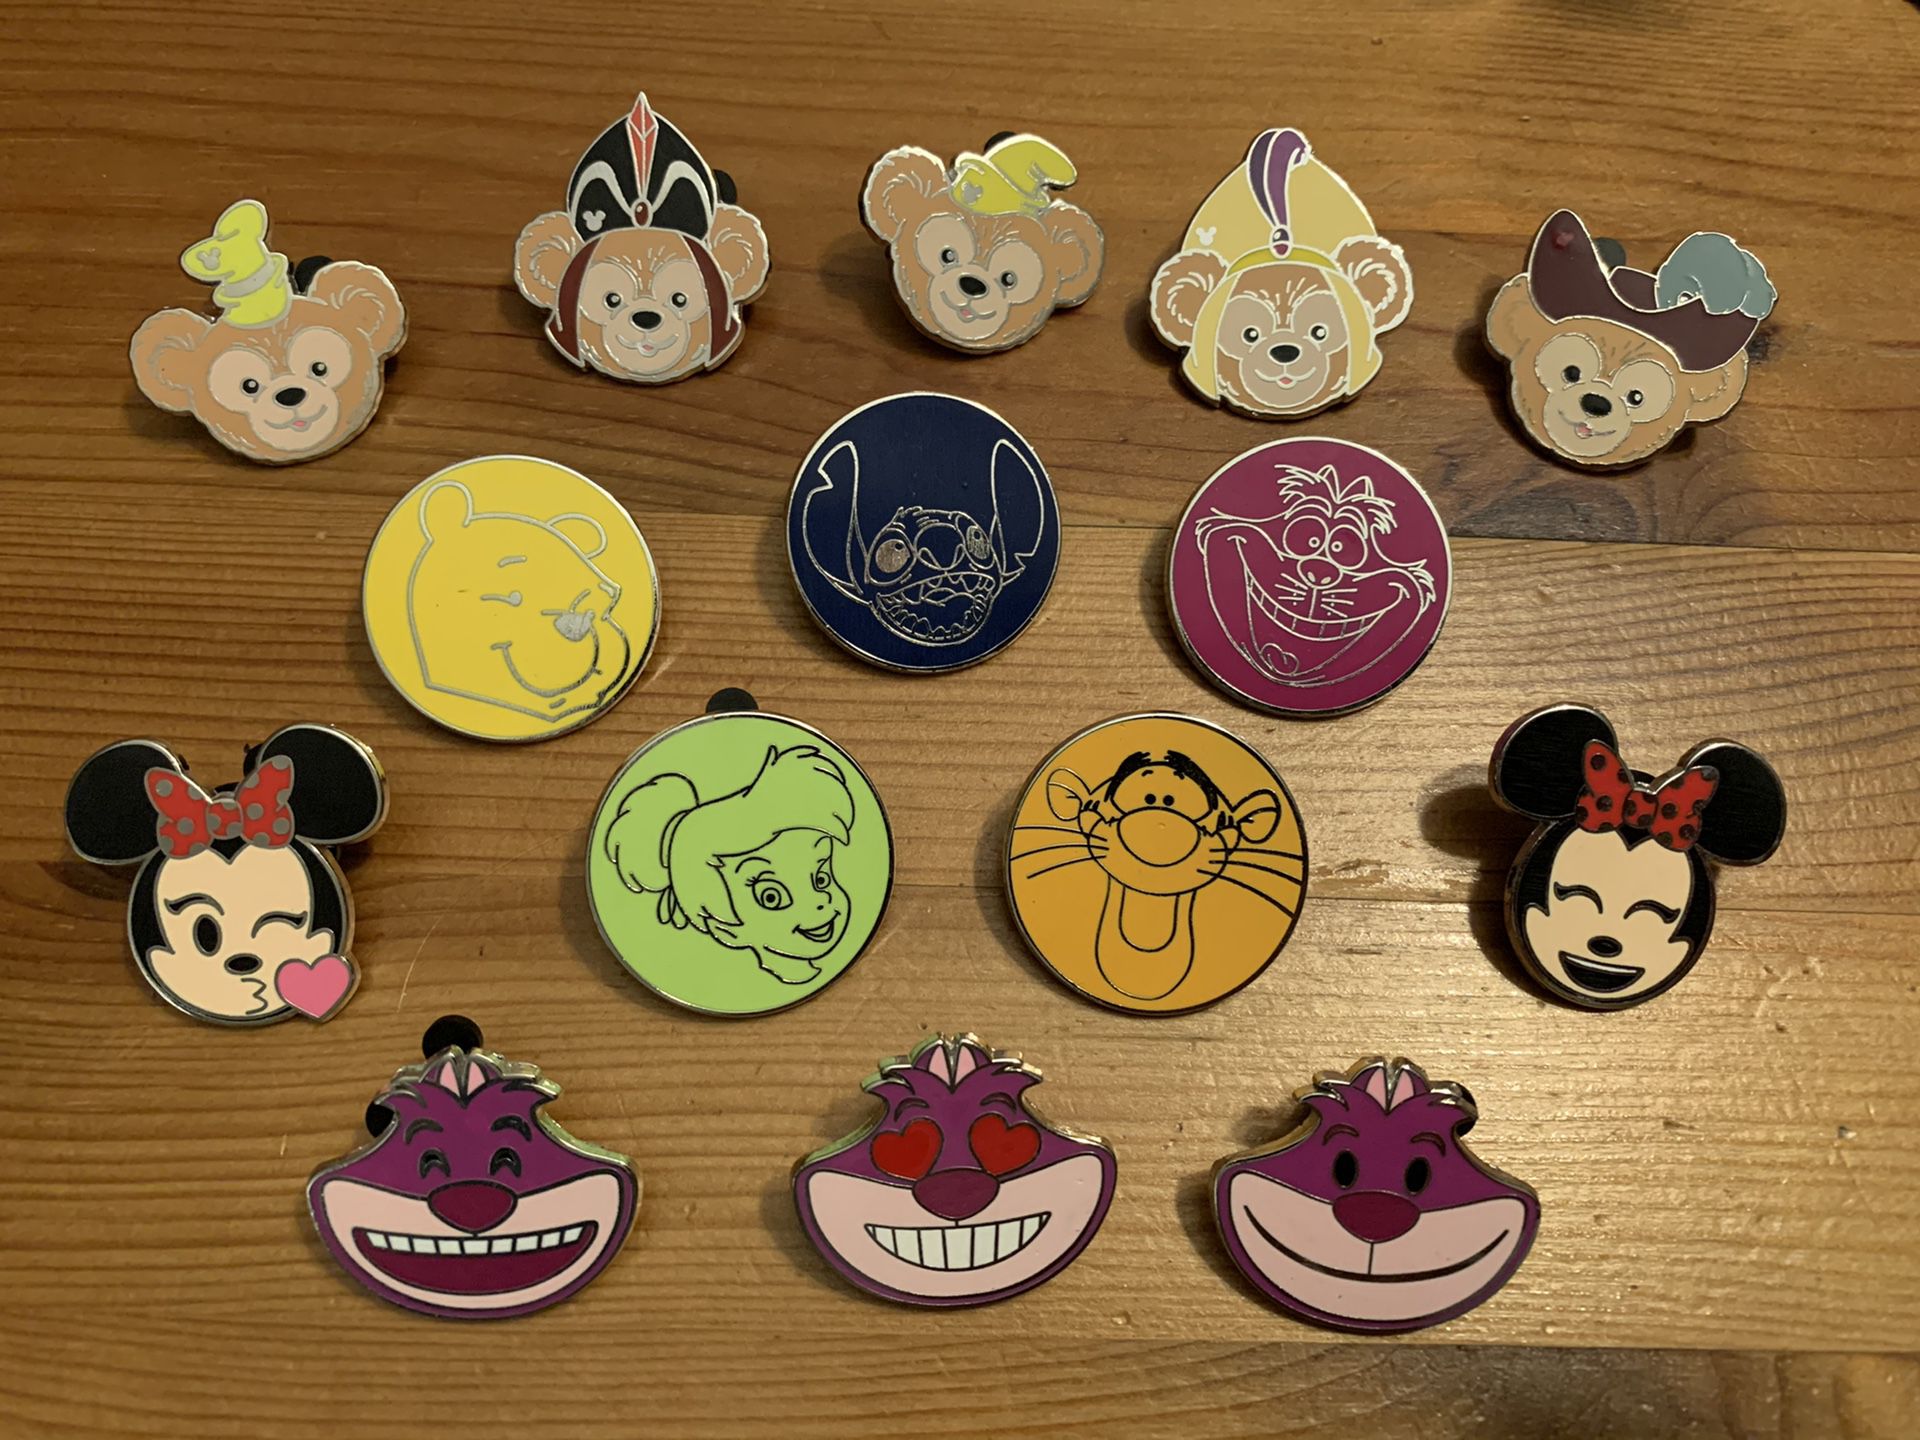 Disney Trading Pins- Instant collection #2